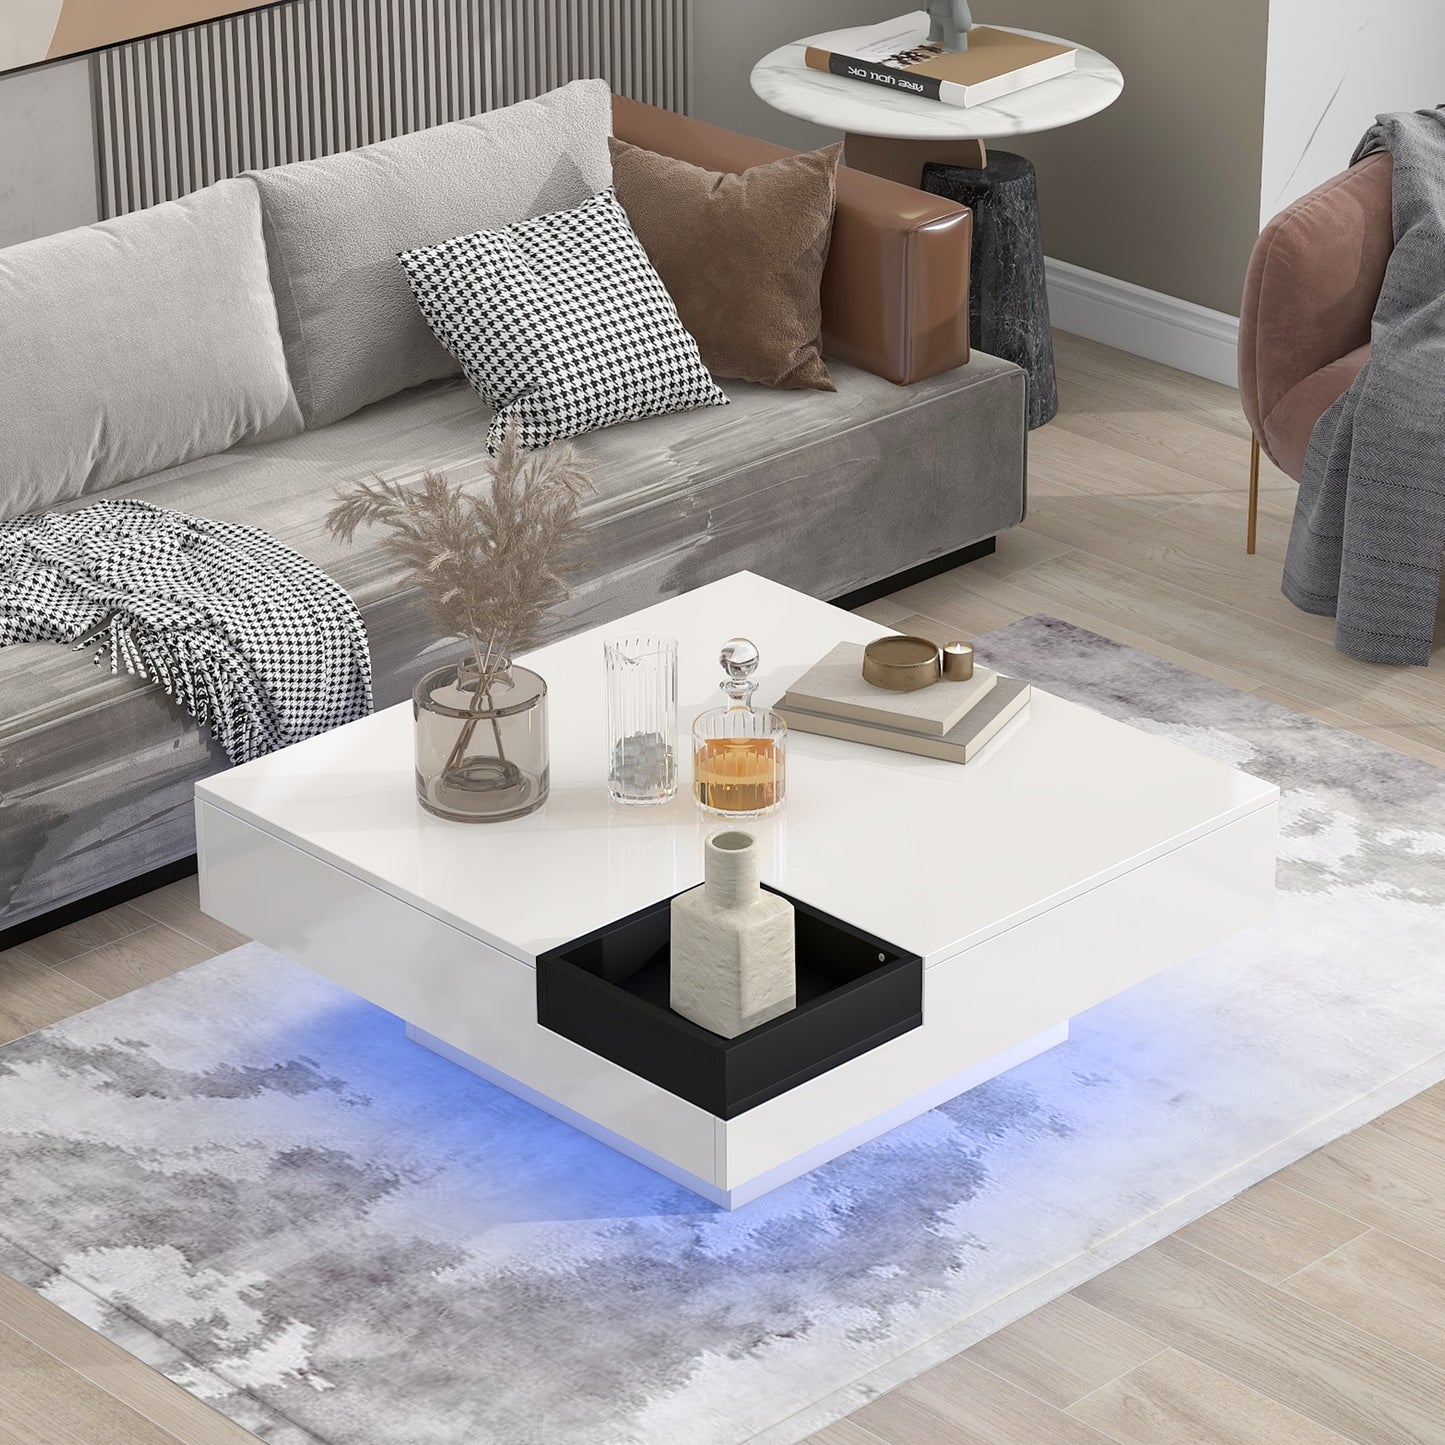 Modern Minimalist Design Square Coffee Table with LED Strip Lights and Detachable Tray